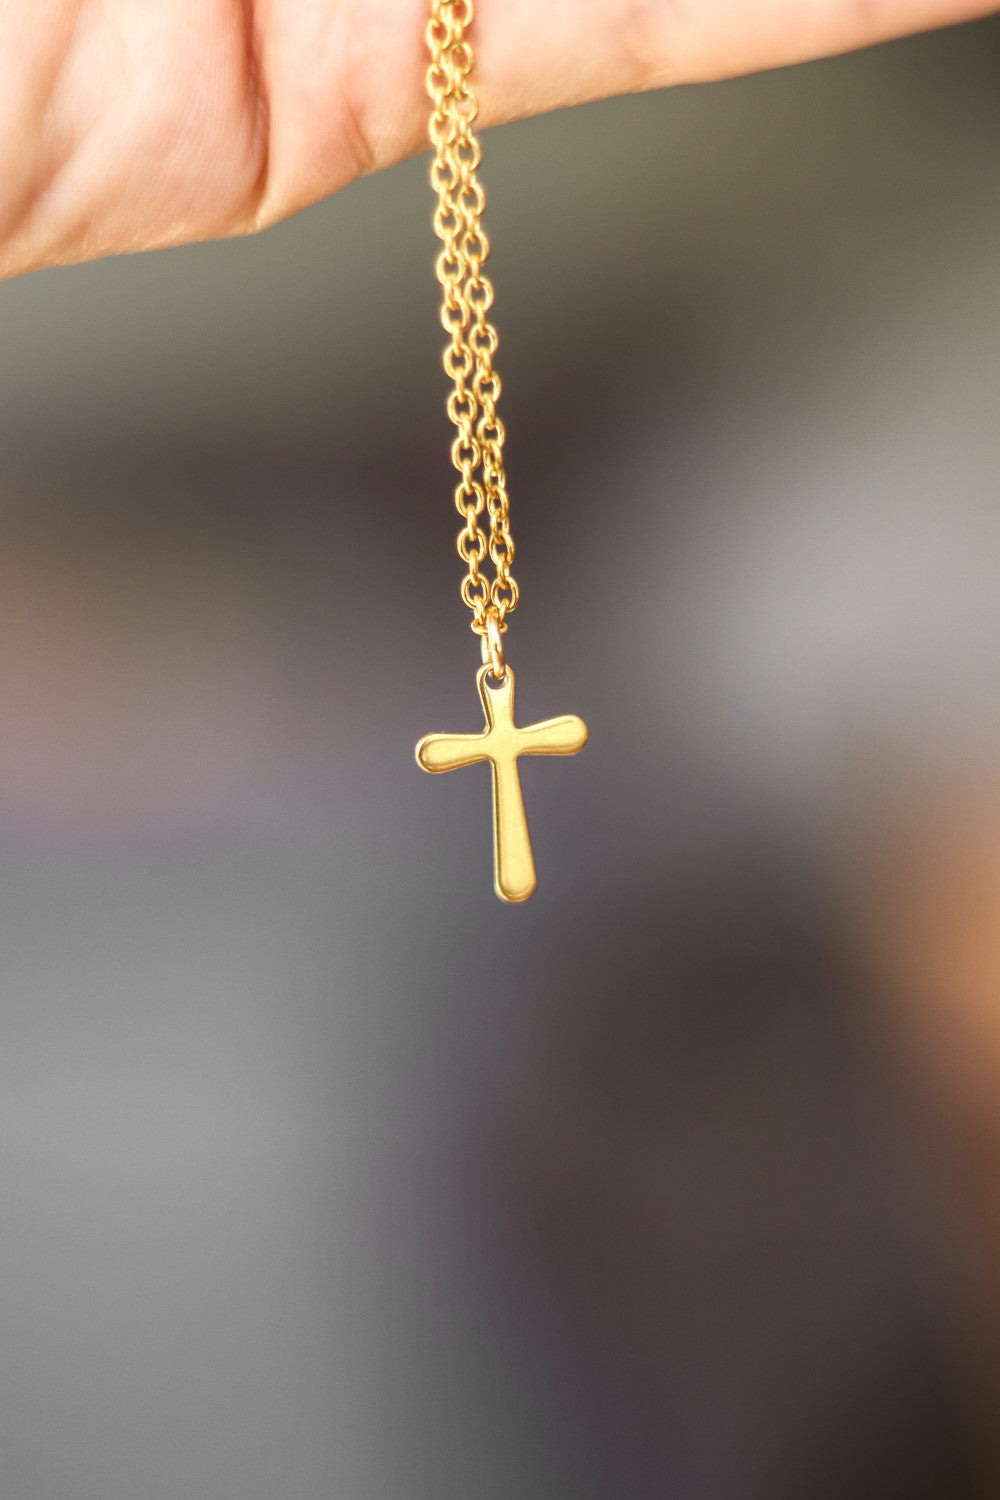 Christian Cross Necklace - Men Pendant Necklace In Gold